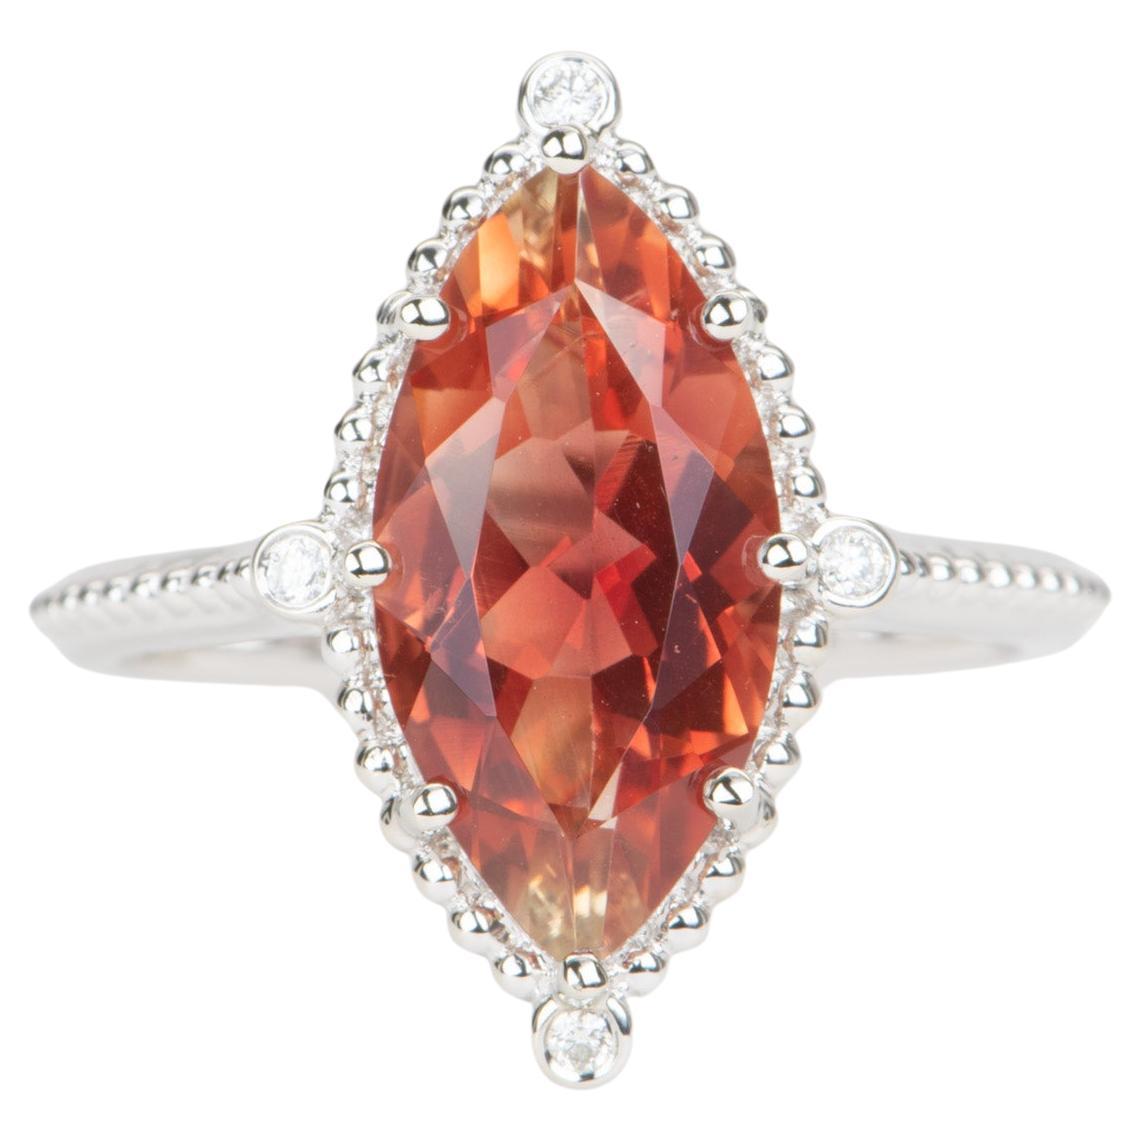 3.25ct Bright Red Oregon Sunstone with Diamonds 14K White Gold Engagement Ring For Sale